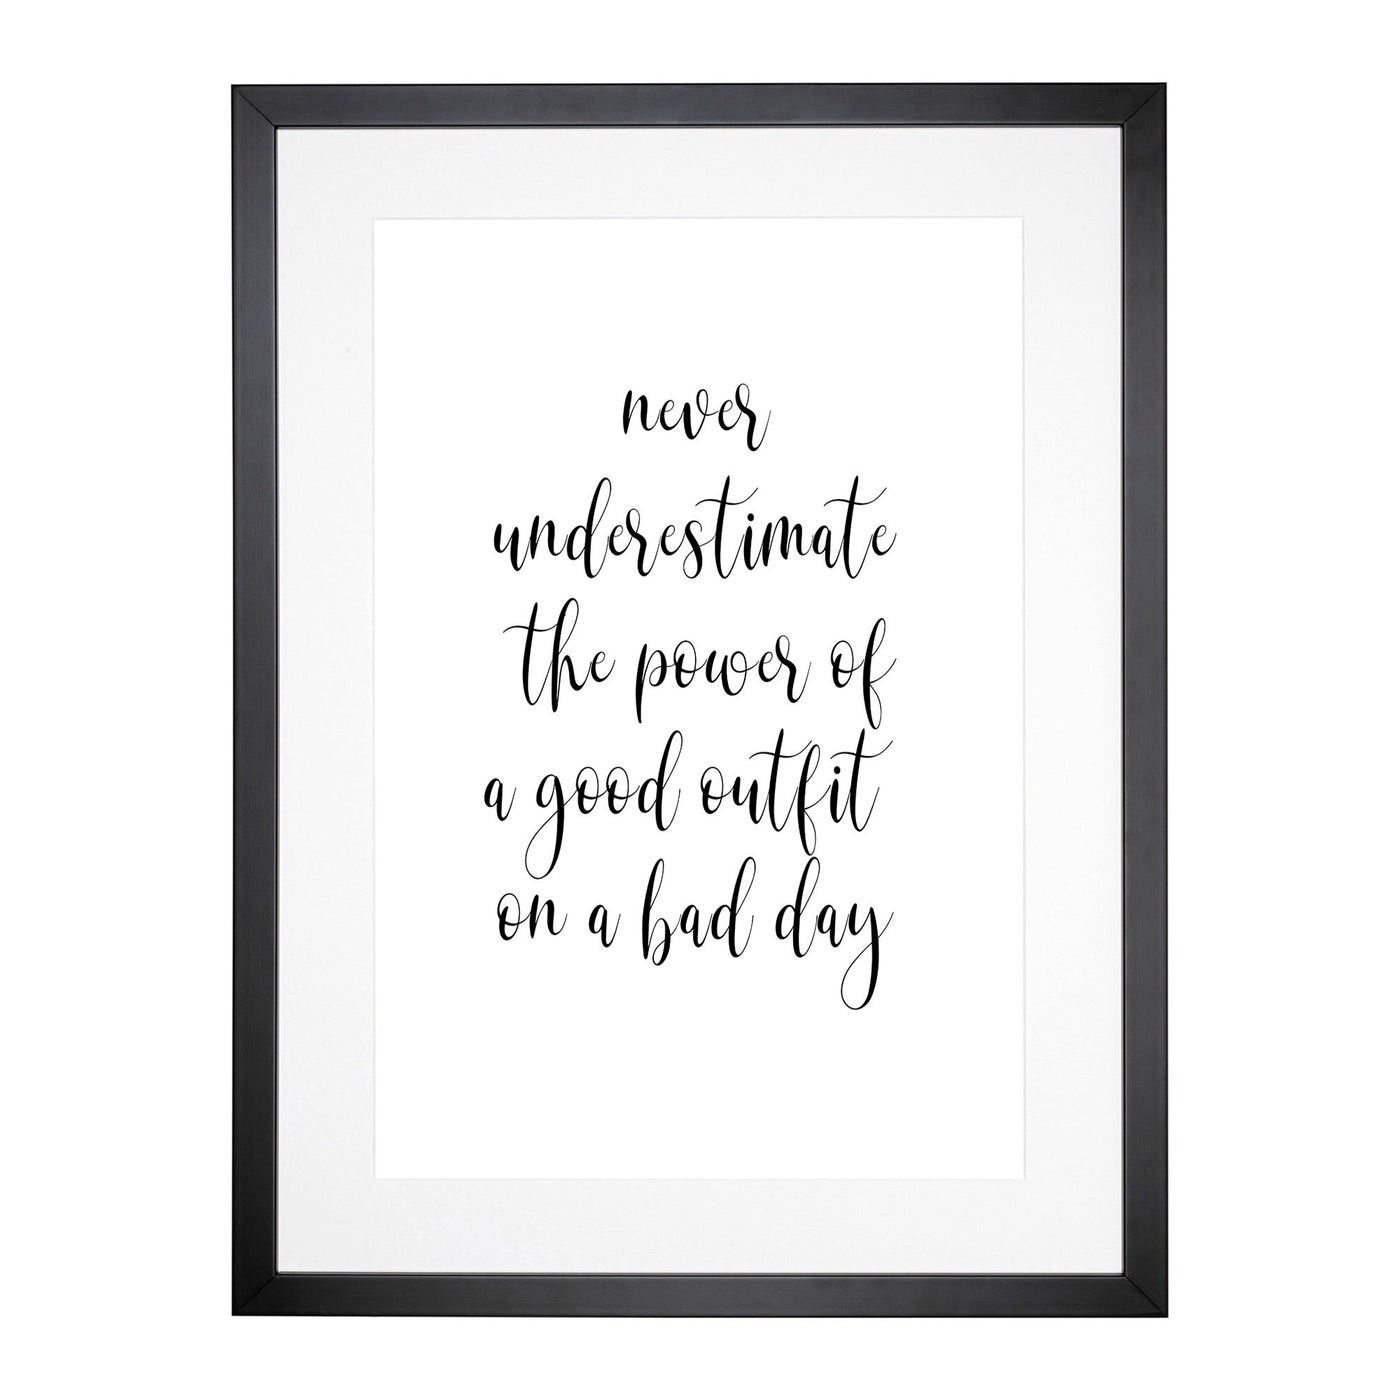 A Good Outfit Typography Framed Print Main Image